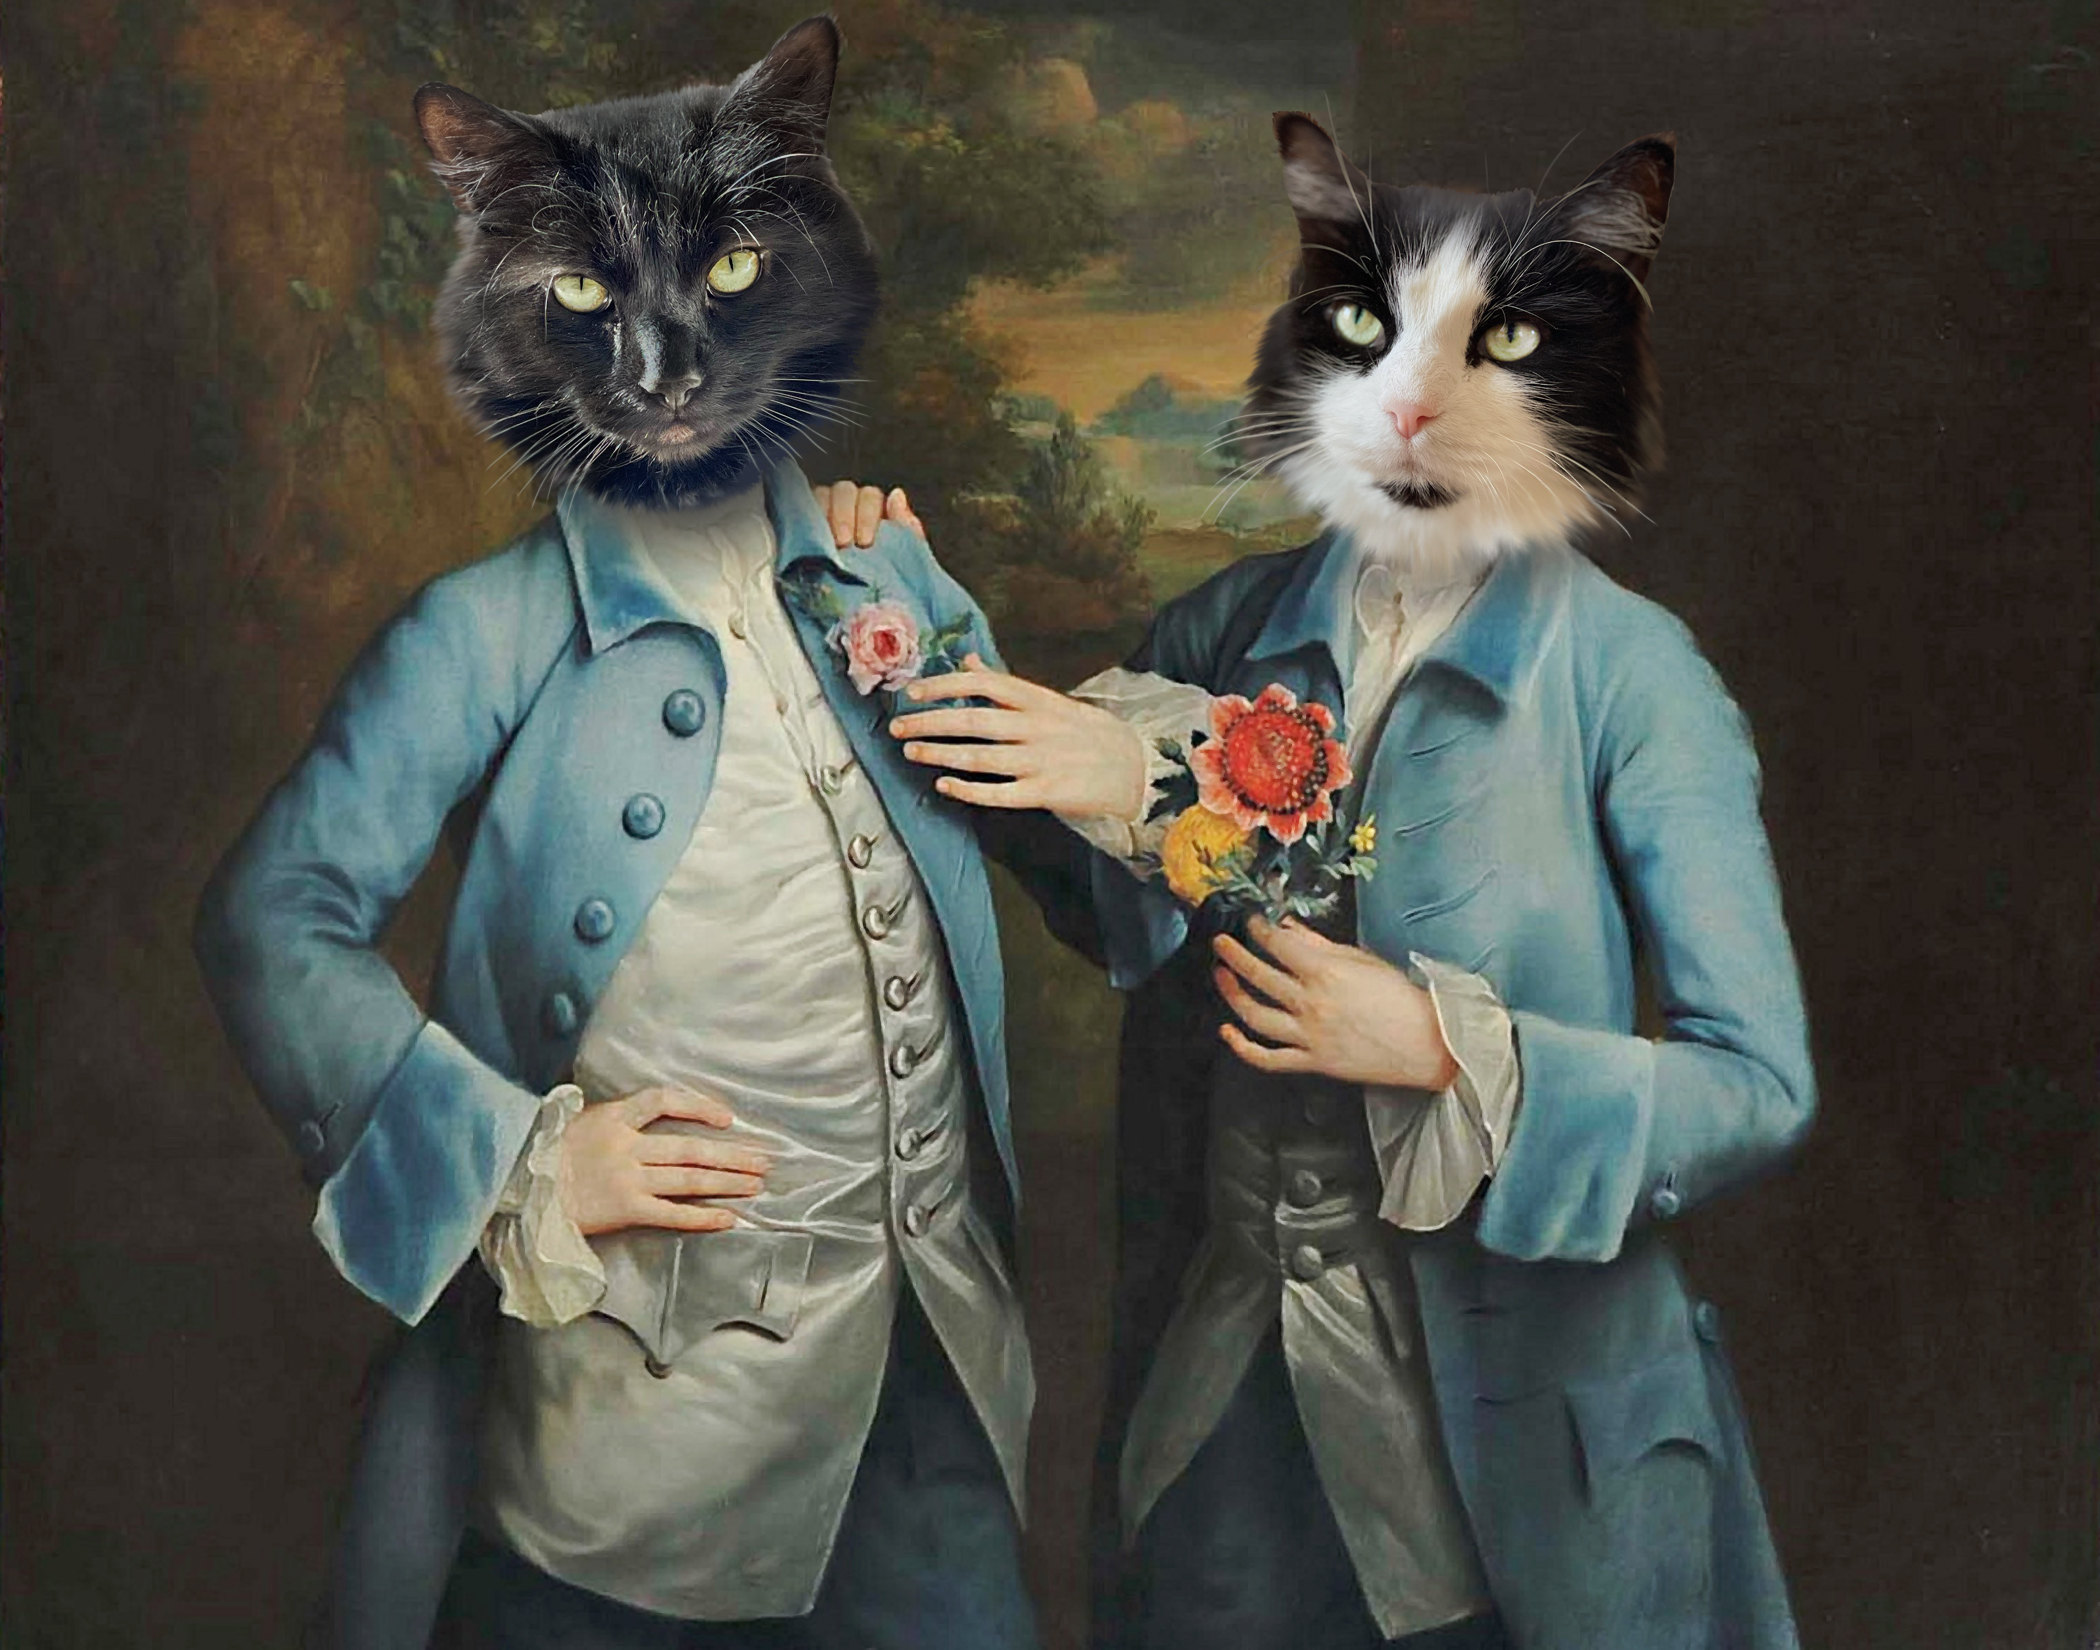 https://www.askamanager.org/wp-content/uploads/2020/12/old-timey-cats.jpeg